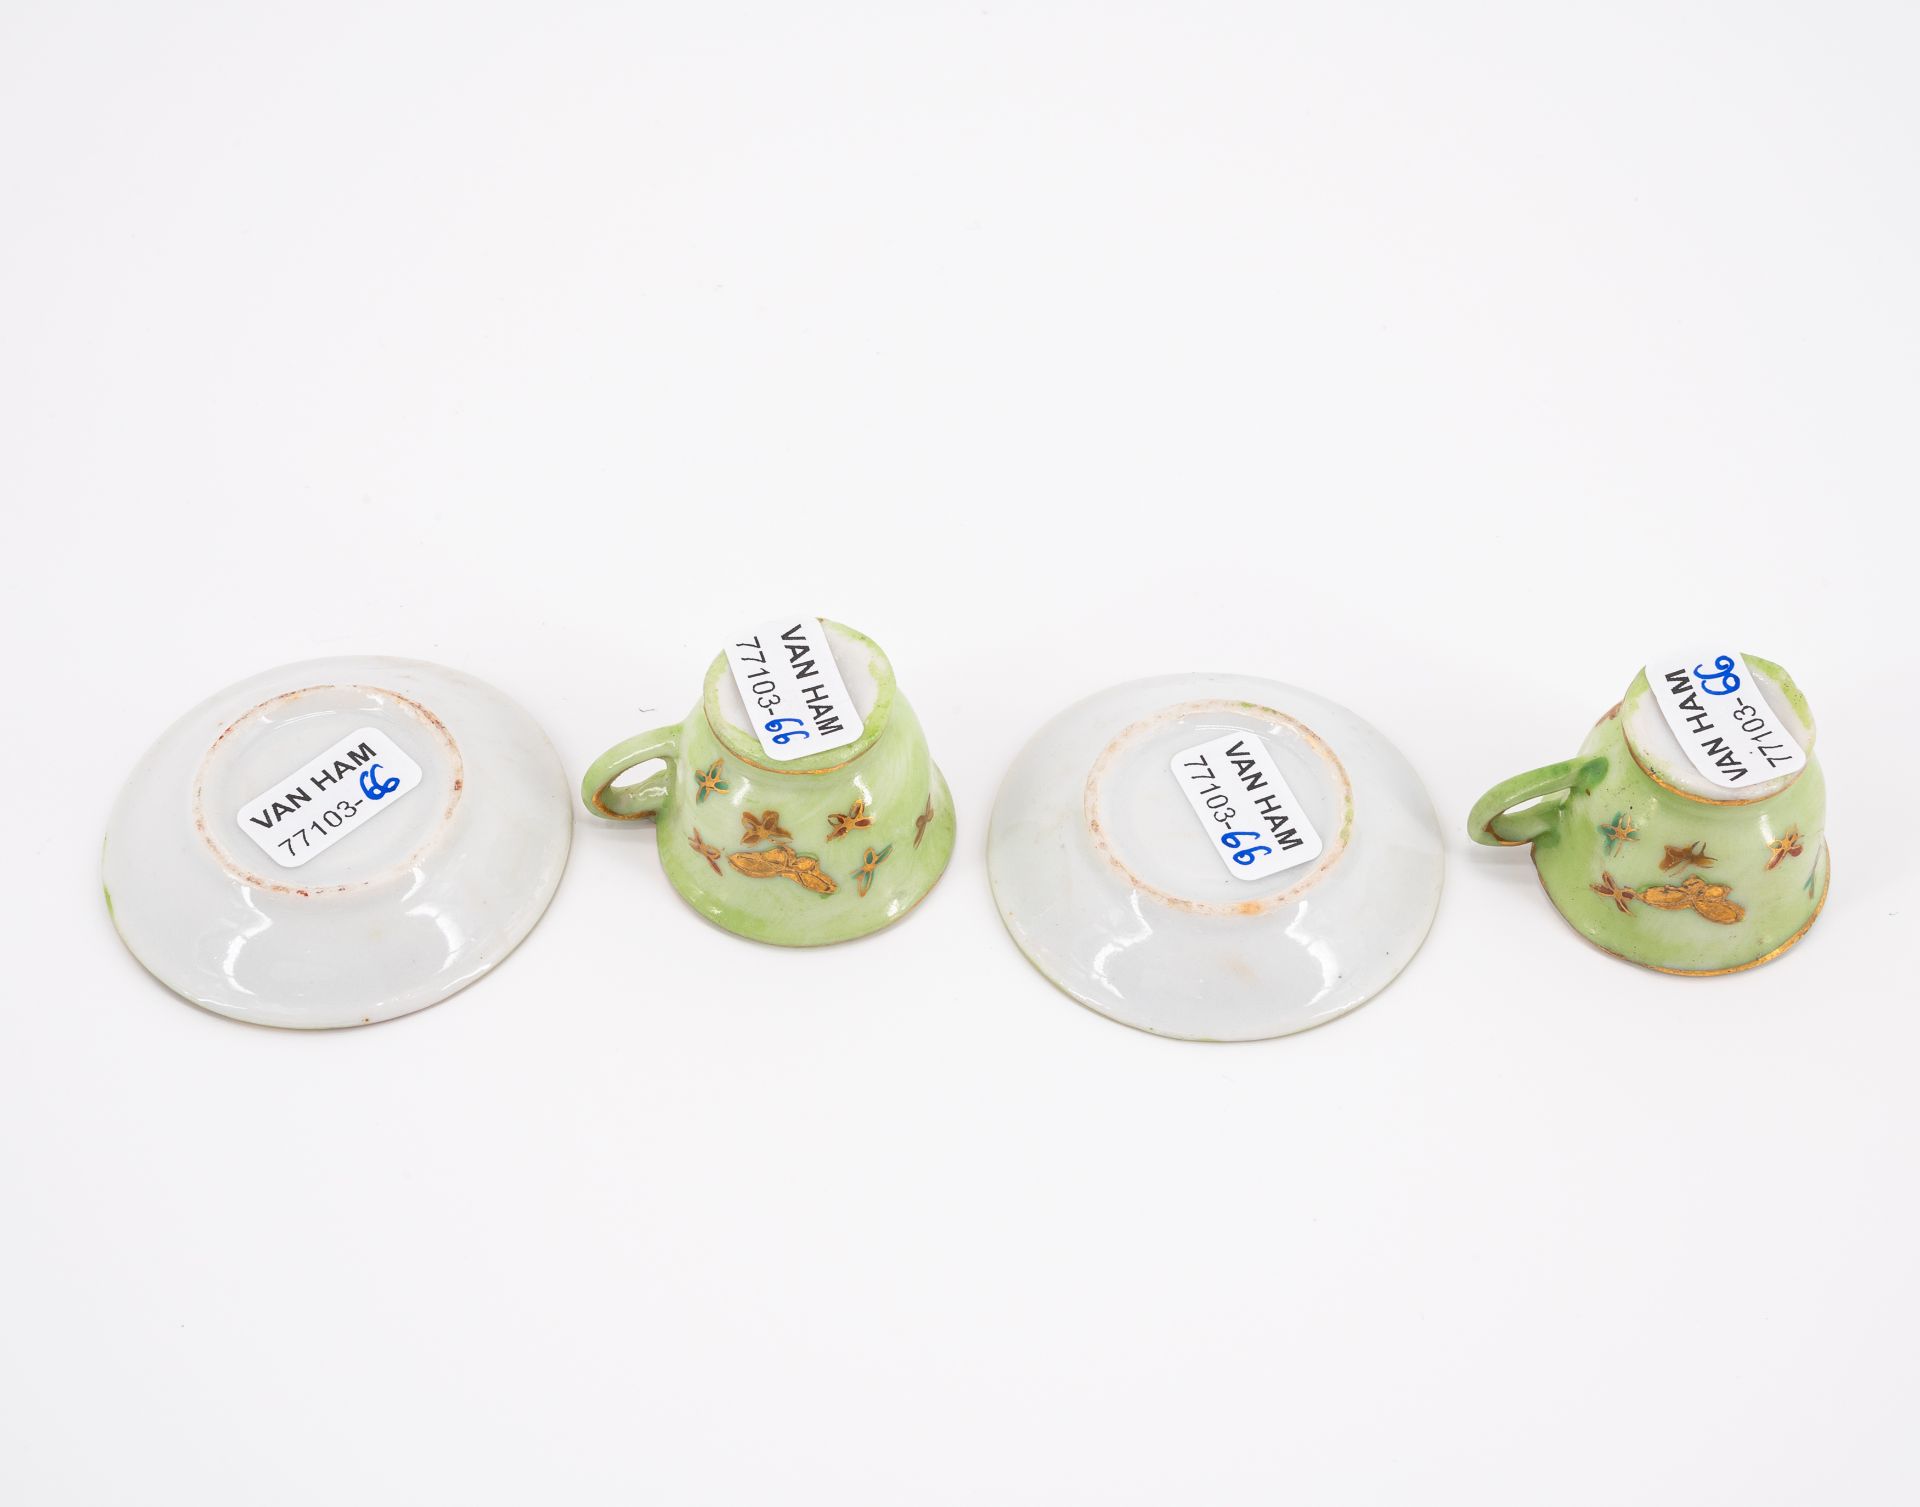 Germany: CERAMIC MINIATURE DINNER SERVICE AND PORCELAIN MINIATURE TEASERVICE - Image 11 of 16